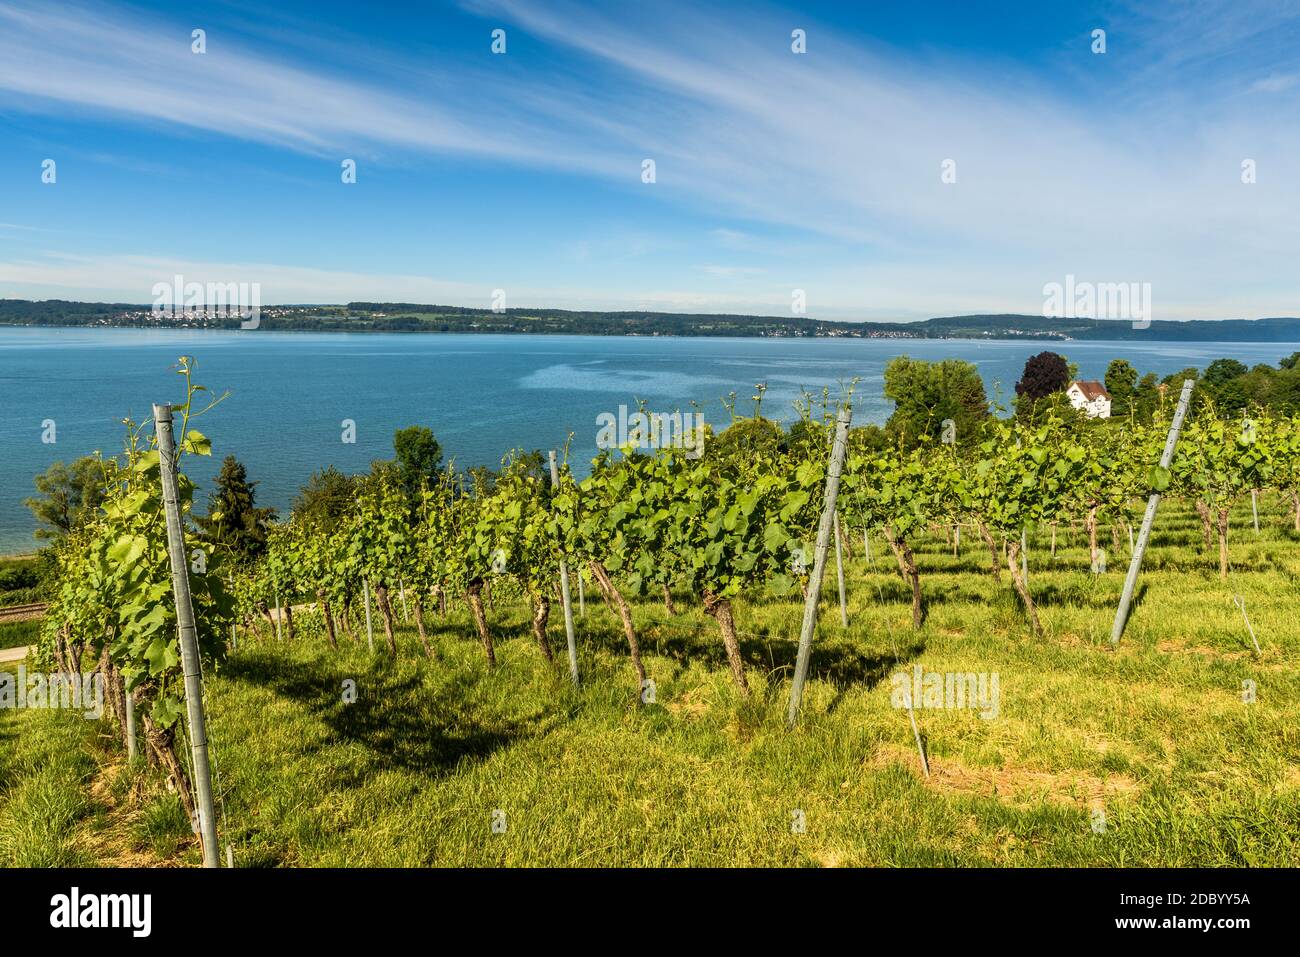 View of Lake Constance from the vineyards near Pilgrimage church Birnau, Baden-Wuerttemberg, Germany Stock Photo